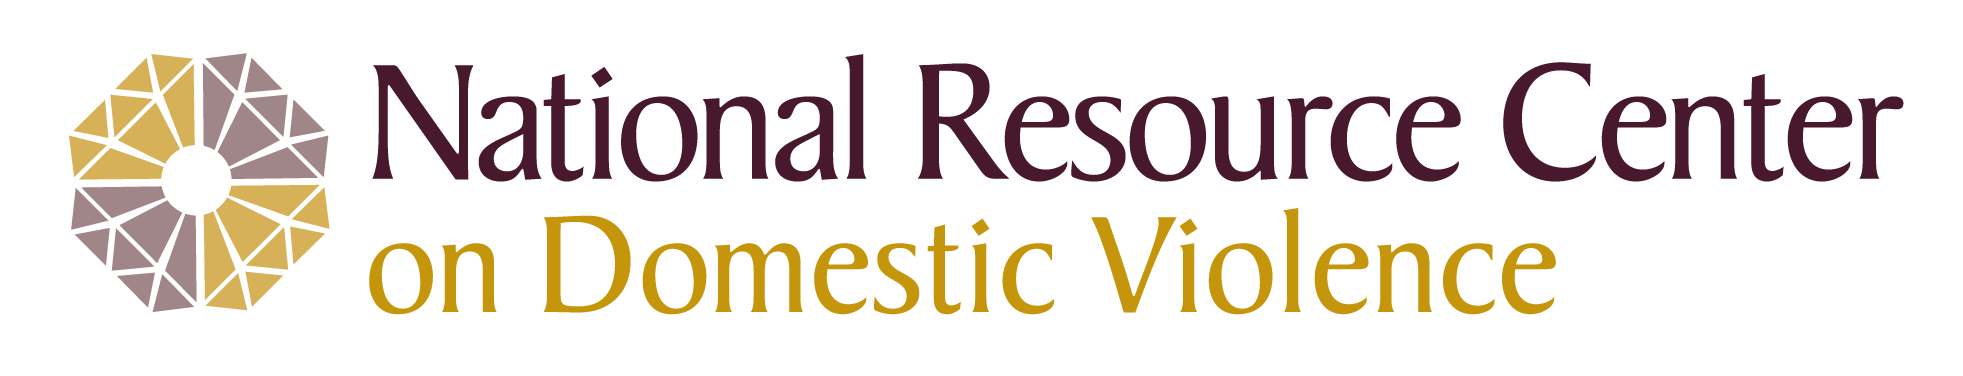 National Resource Center on Domestic Violence logo